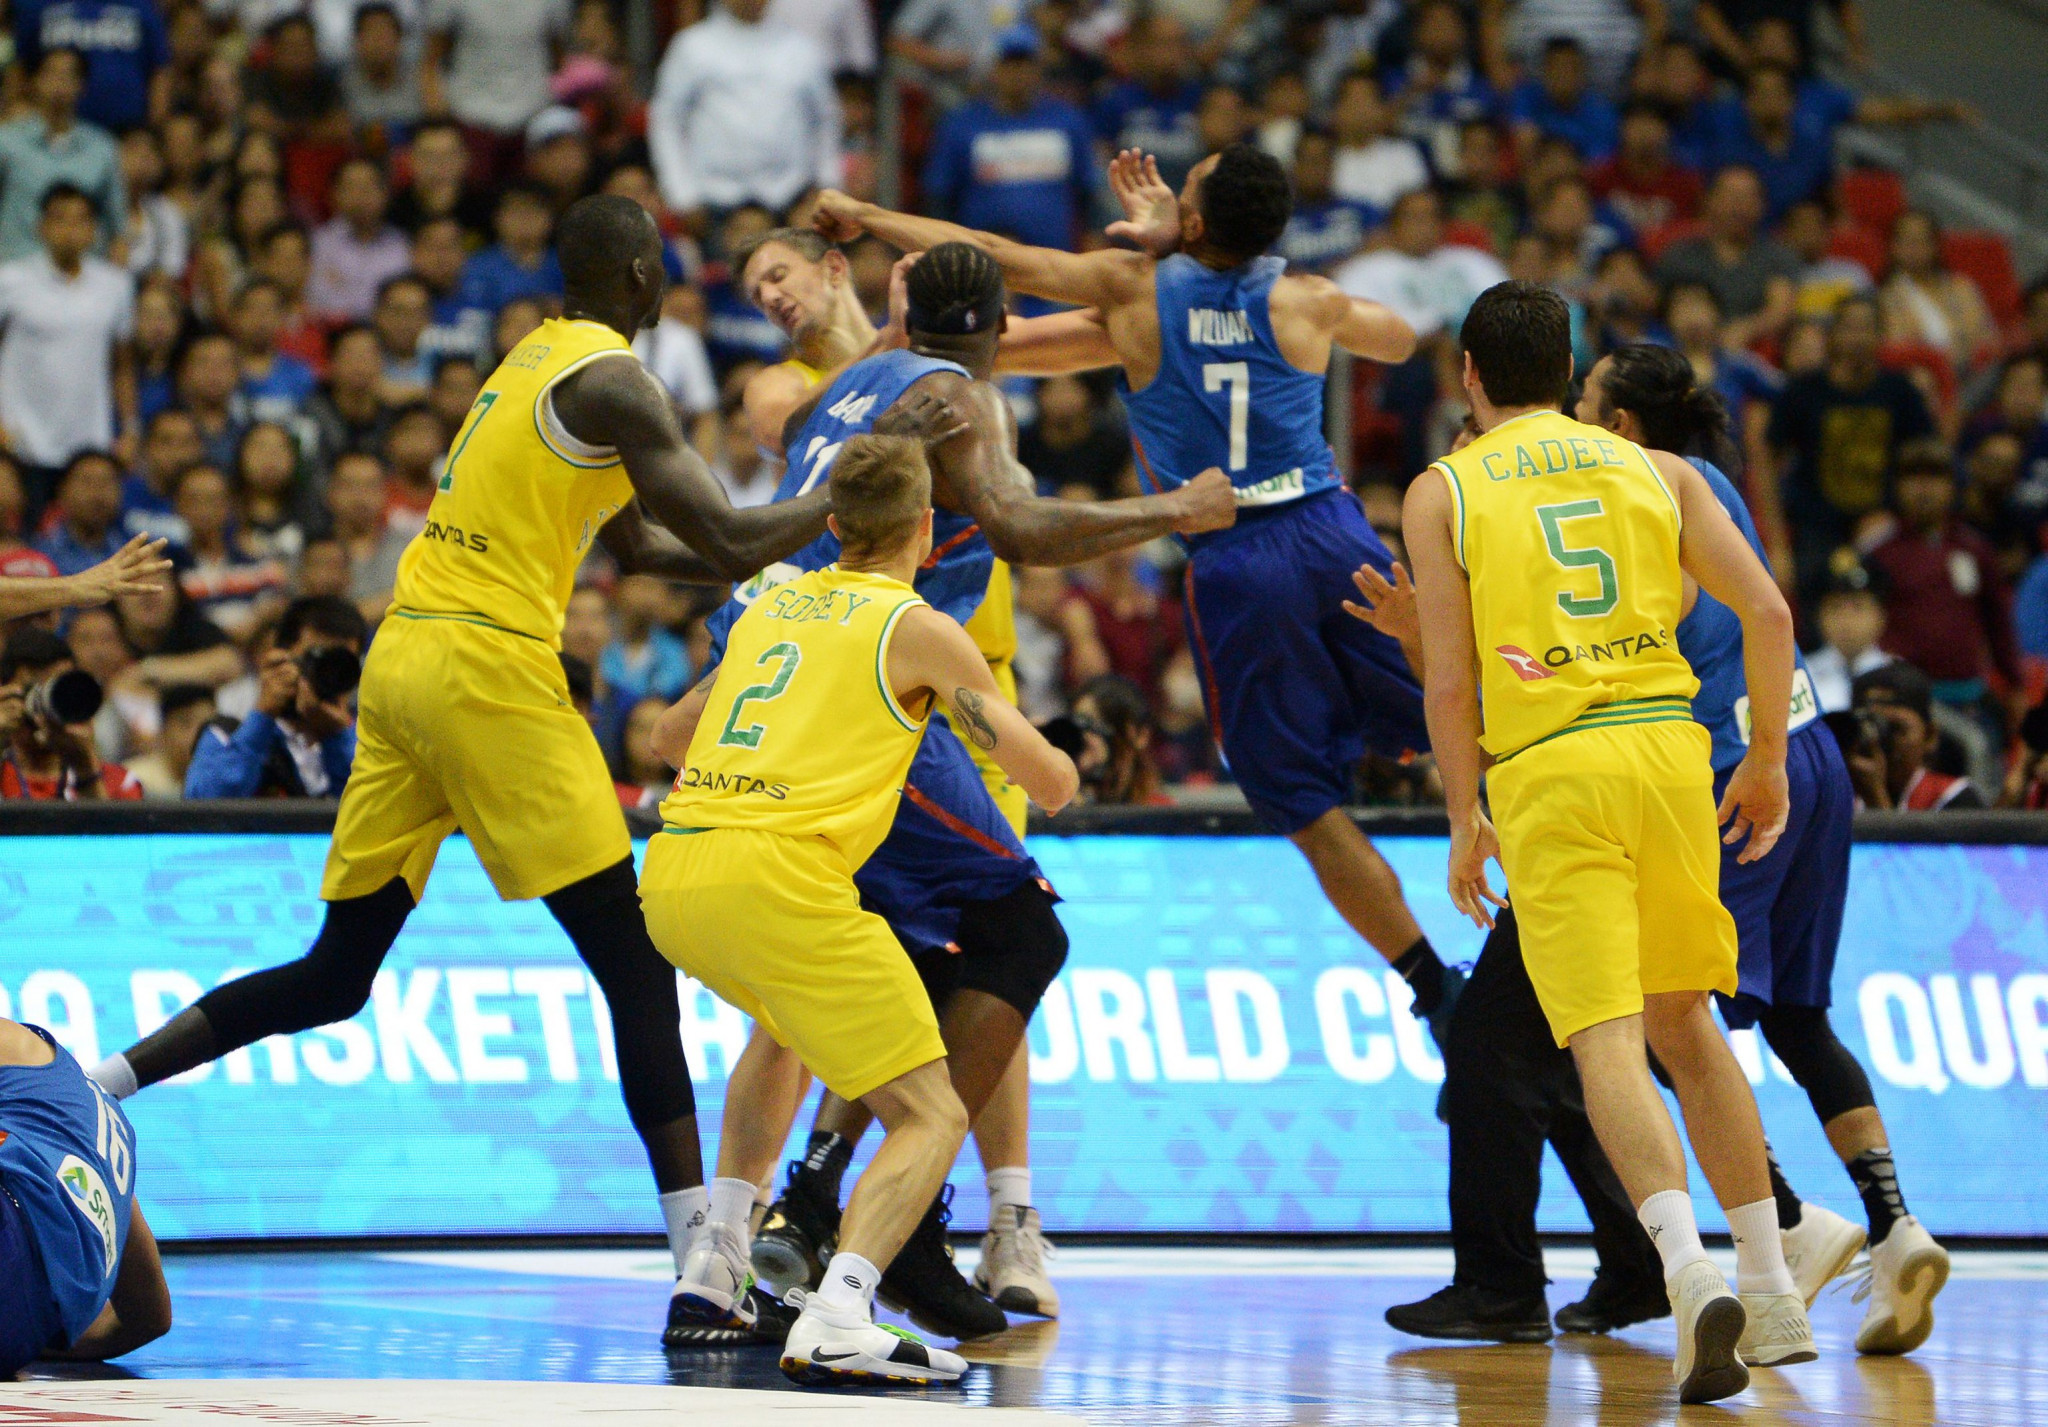 Players, coaches and referees banned after mass brawl in FIBA World Cup qualifier